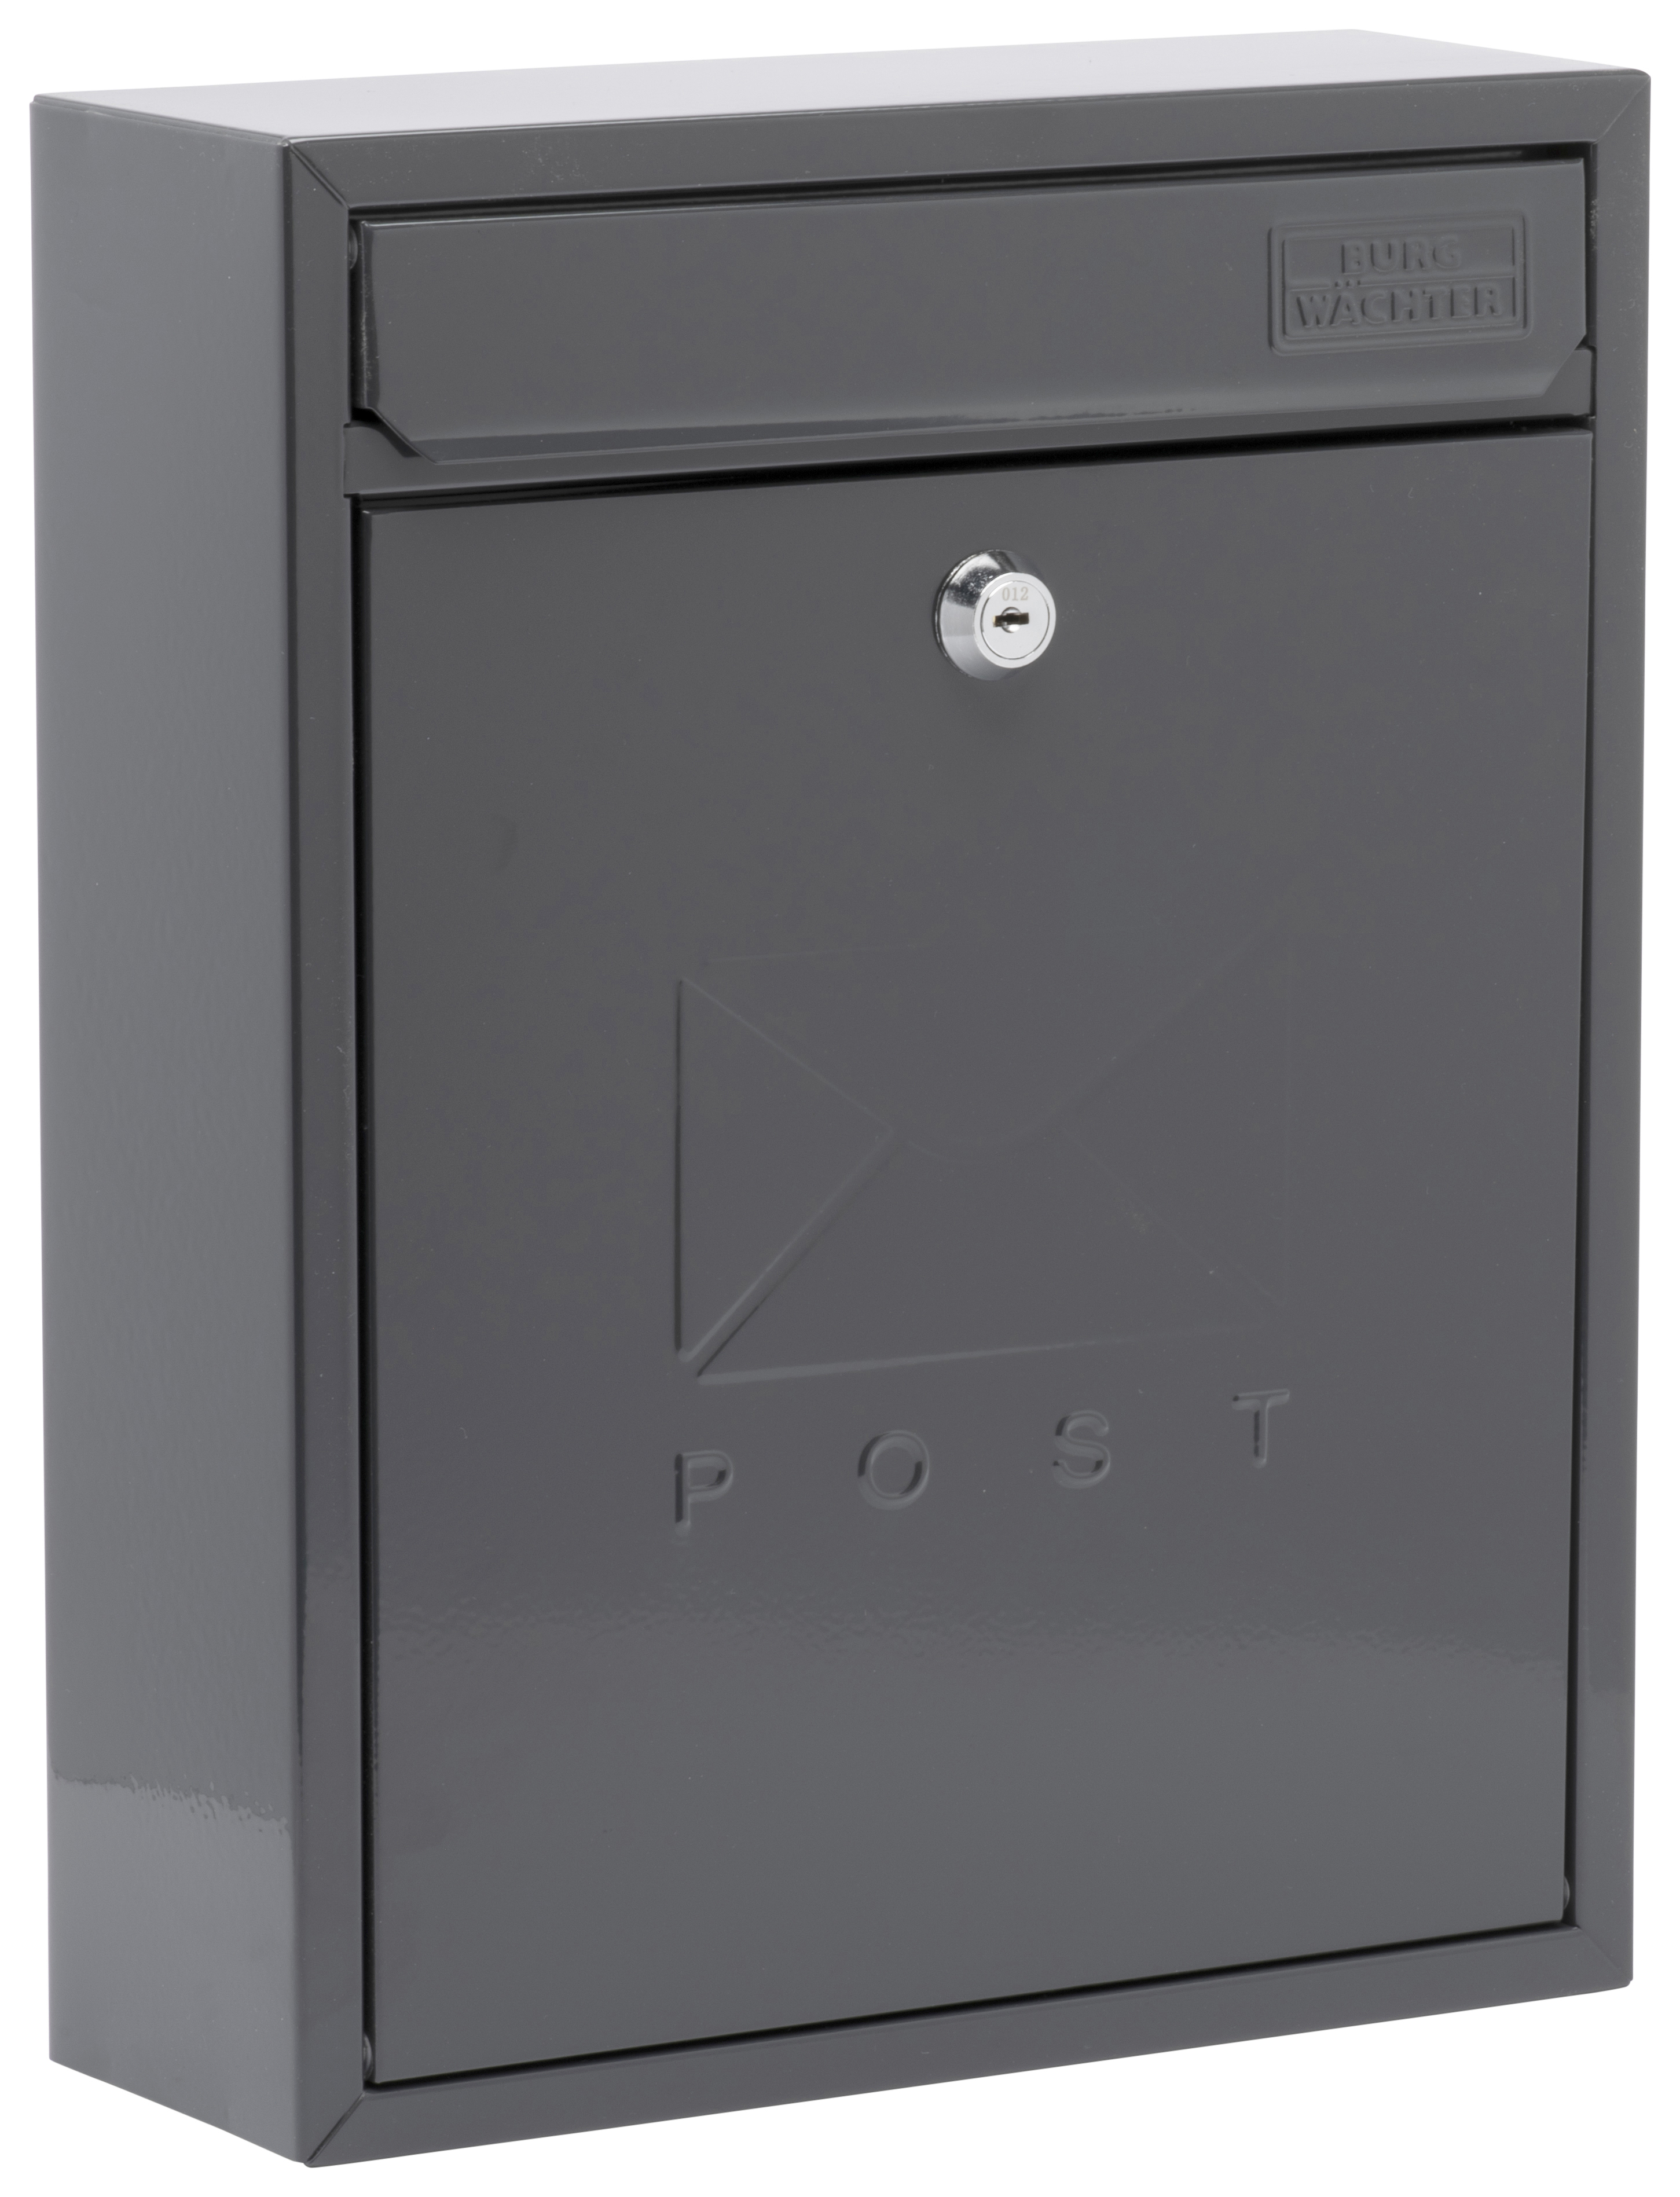 Burg-Wachter Compact Anthracite Post Box | Wickes.co.uk